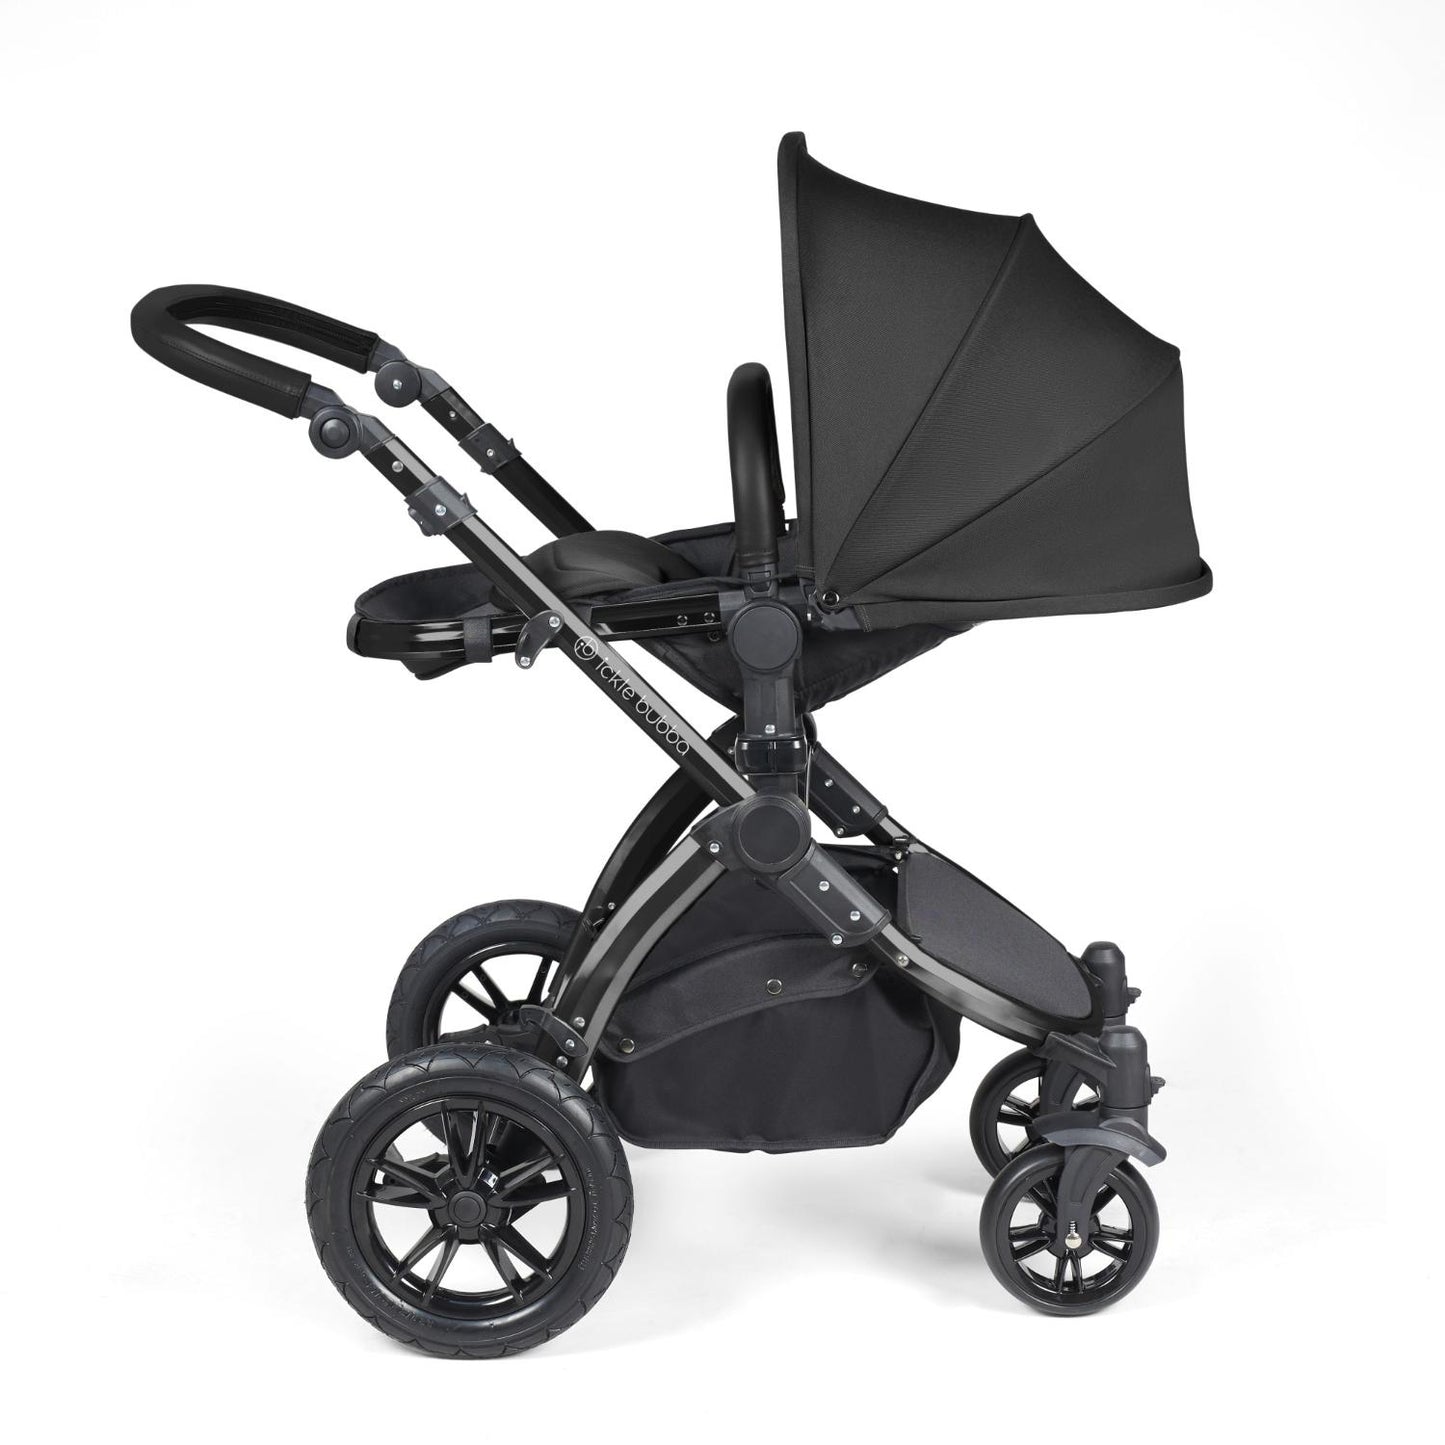 Recline position of Ickle Bubba Stomp Luxe Pushchair in Midnight black colour